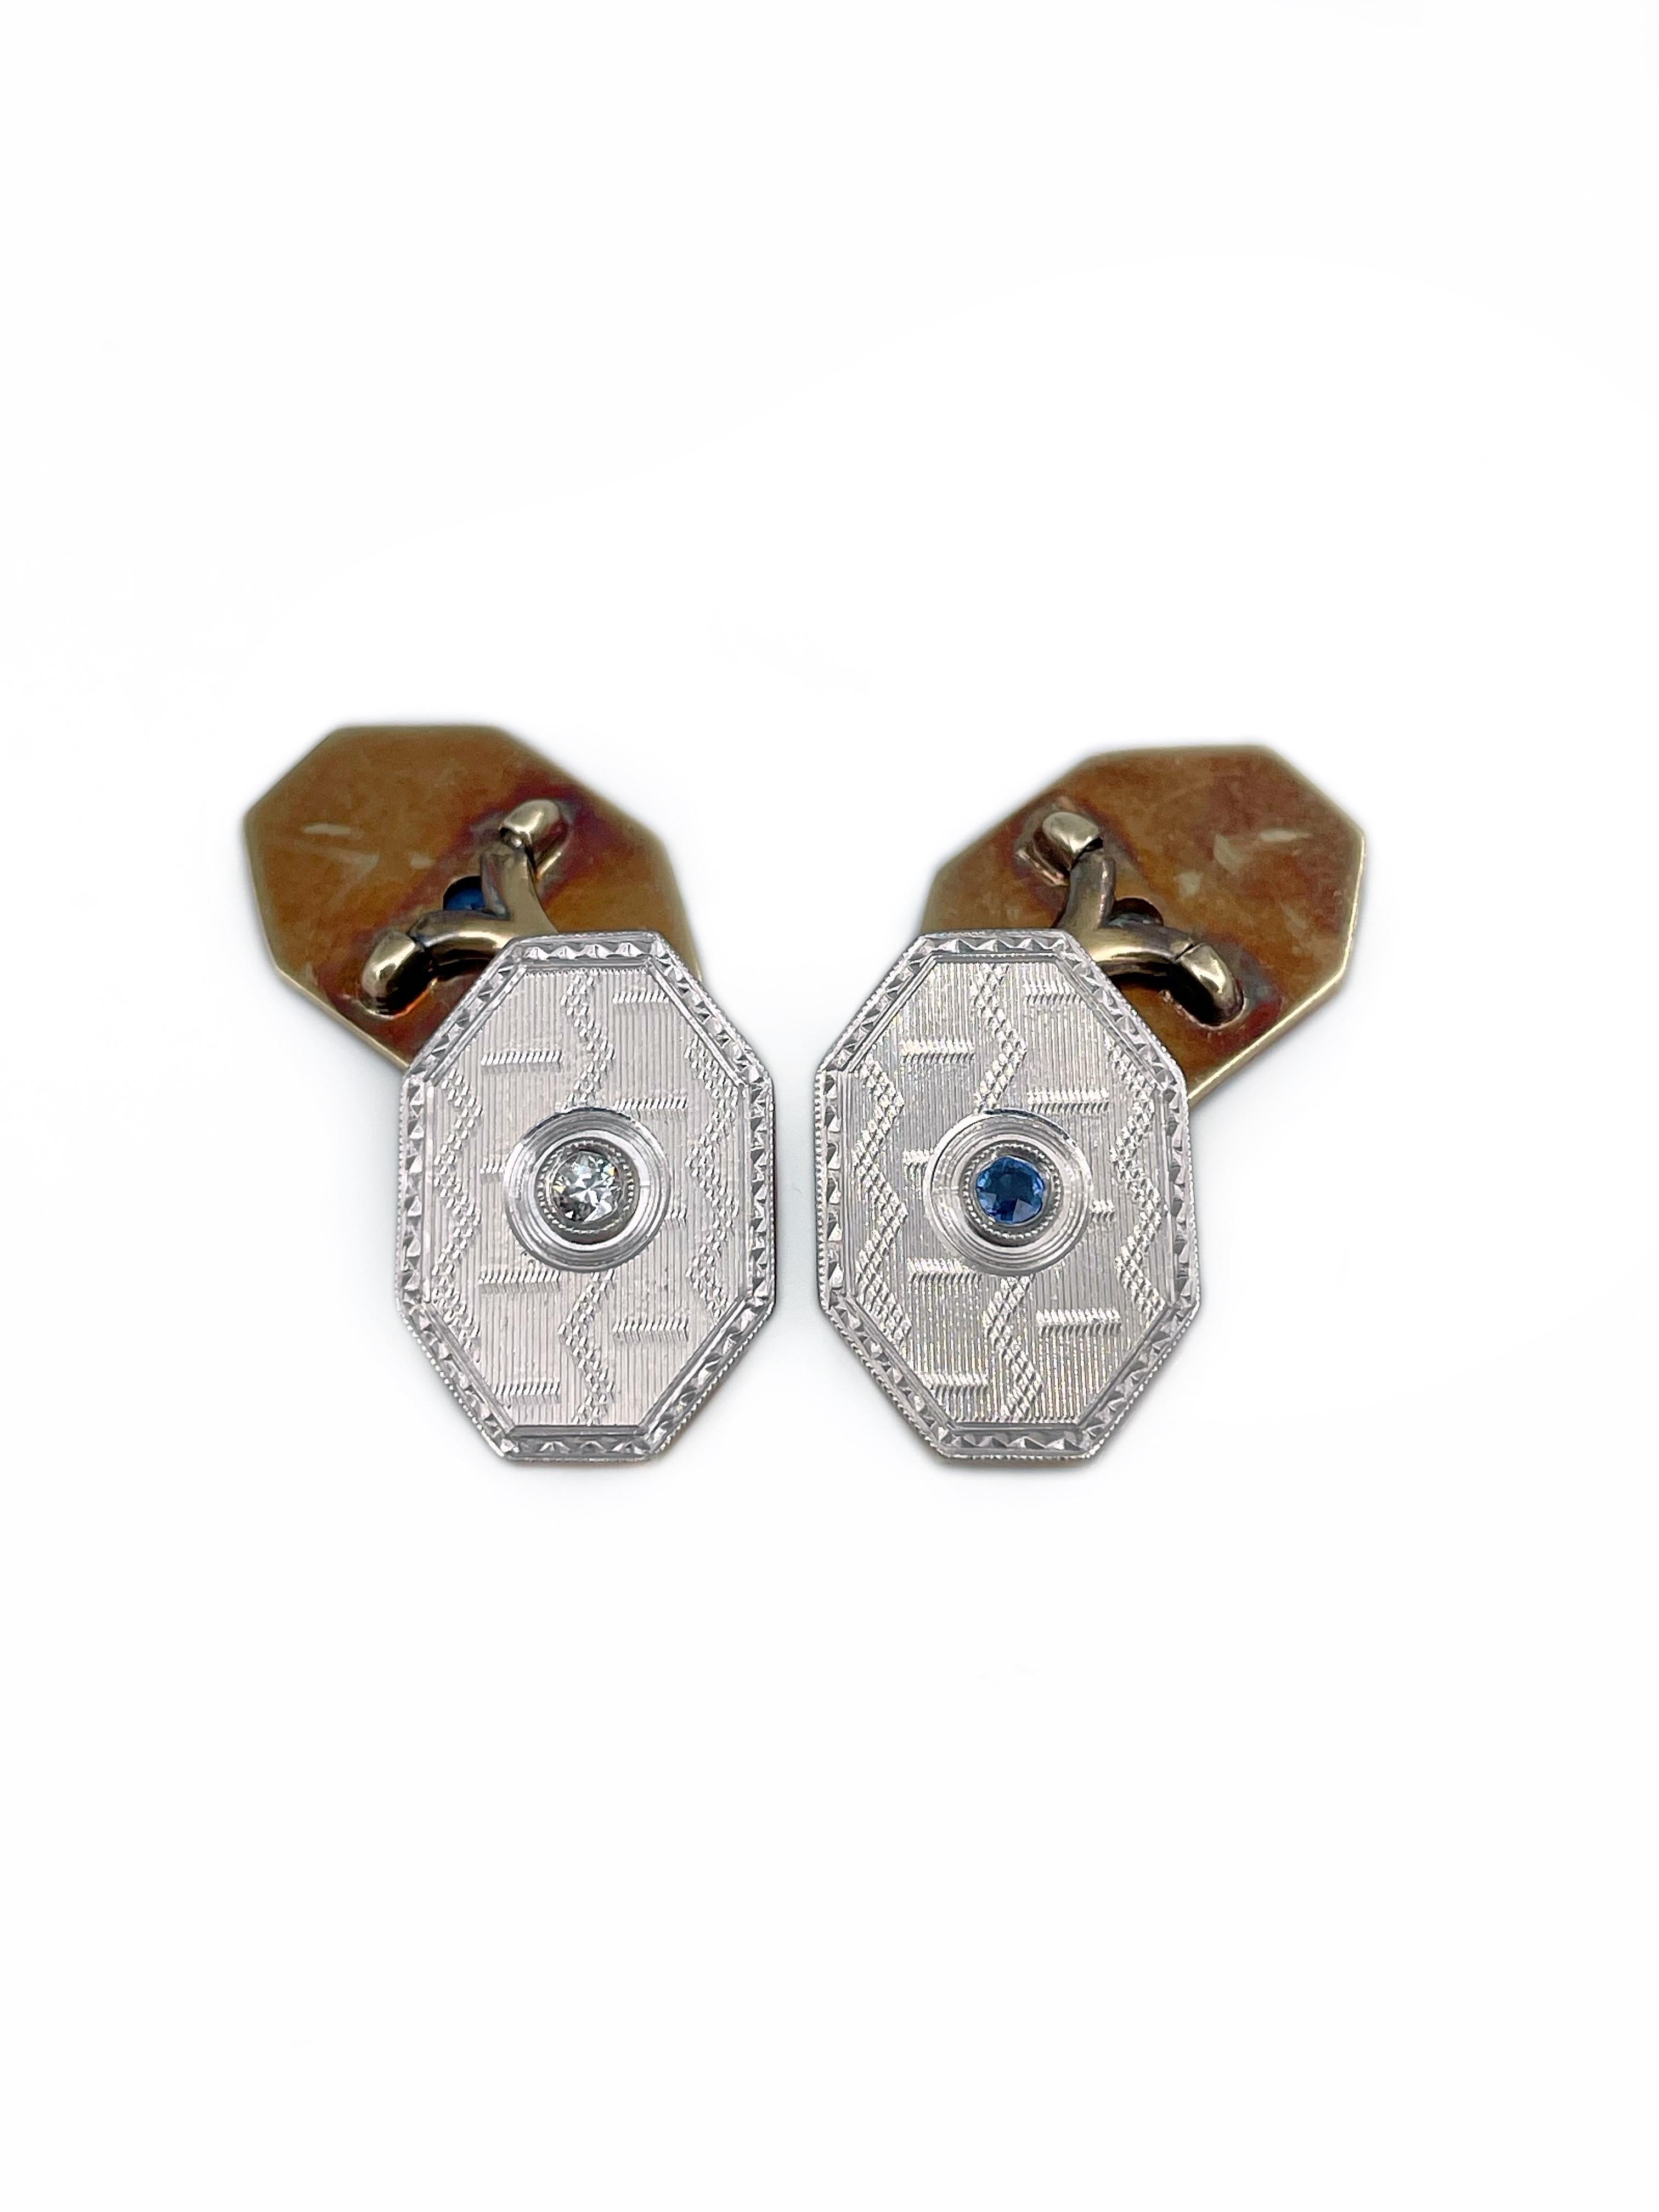 This is a pair of an Art Deco textured rectangle cufflinks crafted in 18K gold. Circa 1920. 

The piece features 2 sapphires and 2 diamonds. 

Head size: 1.7x1.2cm
Height: 2cm
Weight: 11.47g

———

If you have any questions, please feel free to ask.